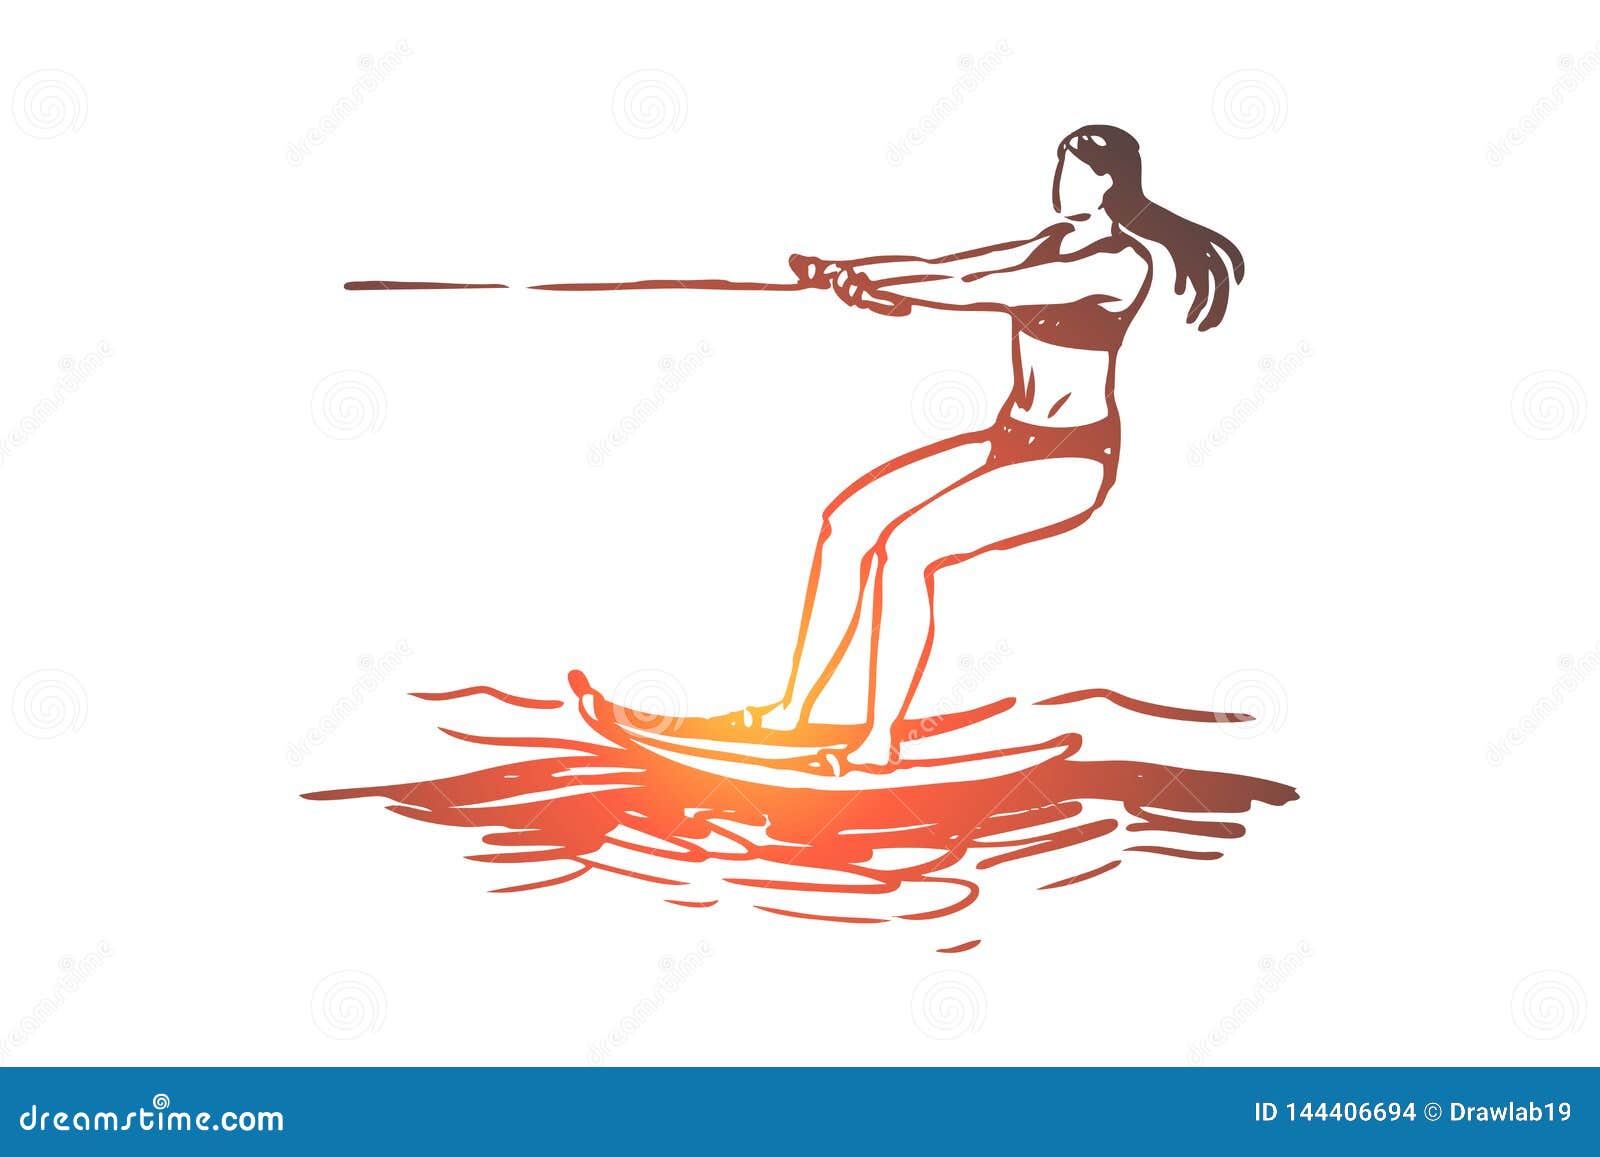 Water Skiing, Sea, Summer, Water, Activity Concept. Hand Drawn Isolated